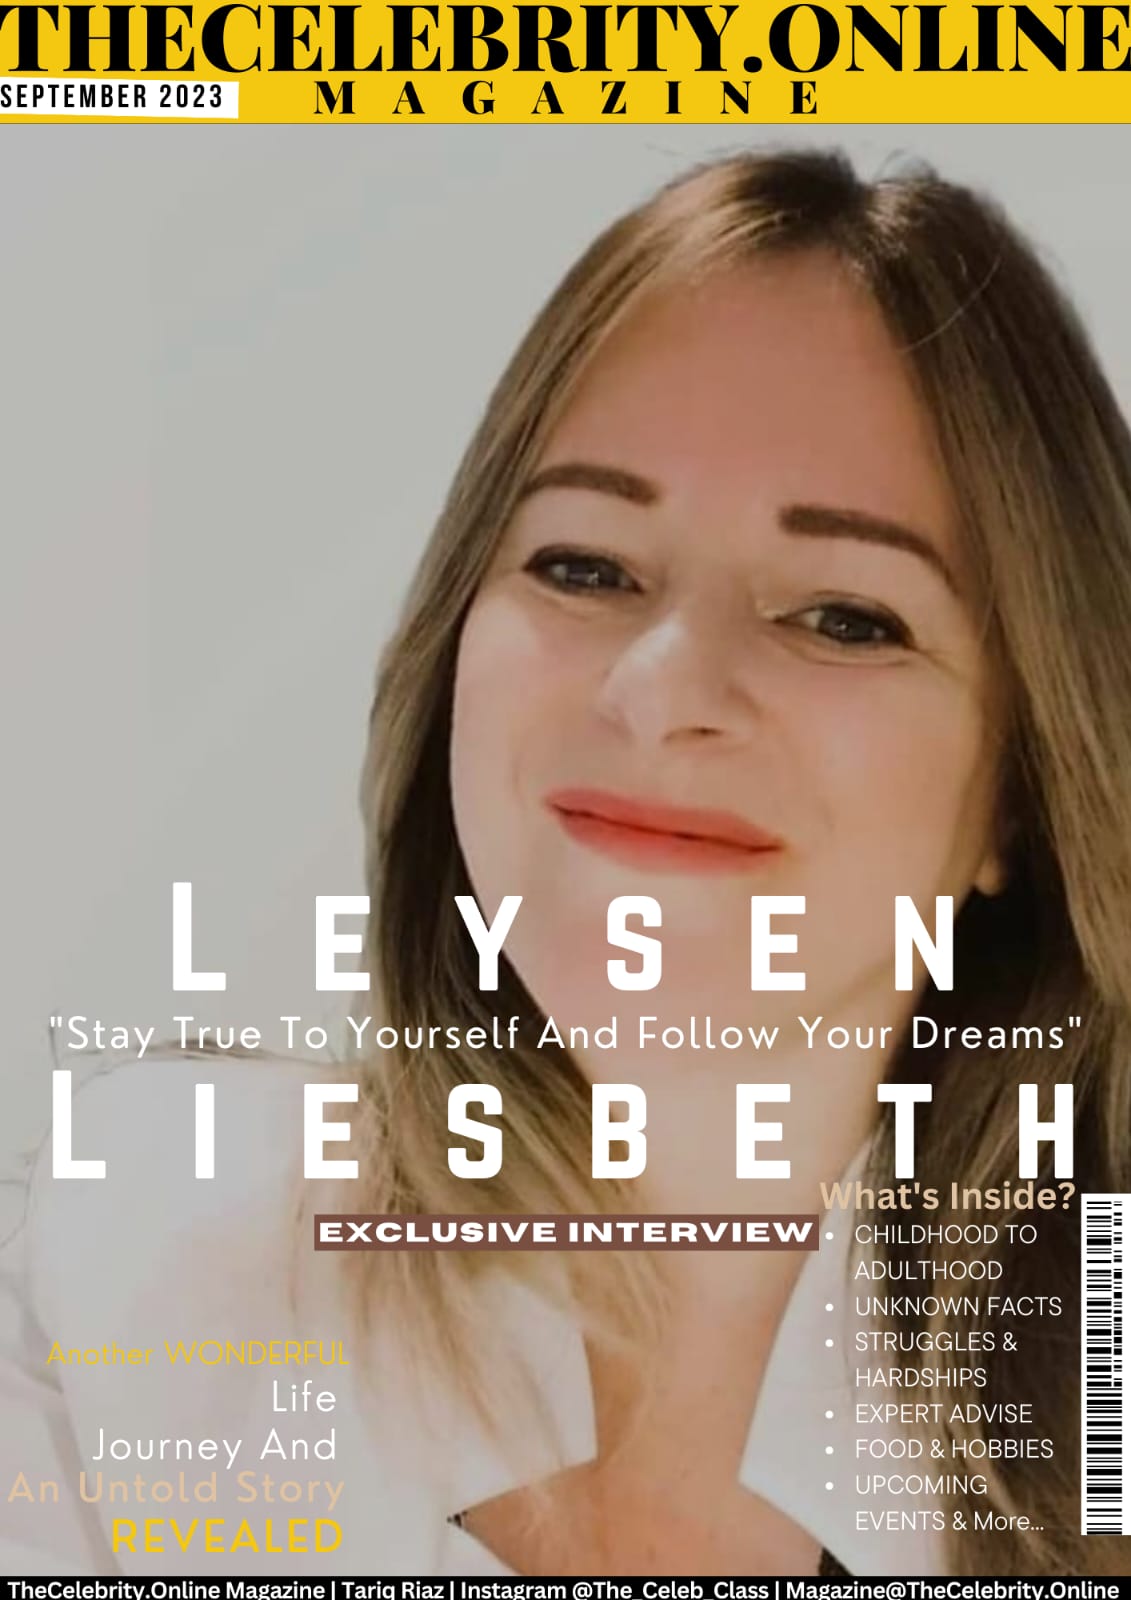 Liesbeth Leysen Exclusive Interview – ‘Stay True To Yourself, Follow Your Dreams, And Take Charge Of Your Life’